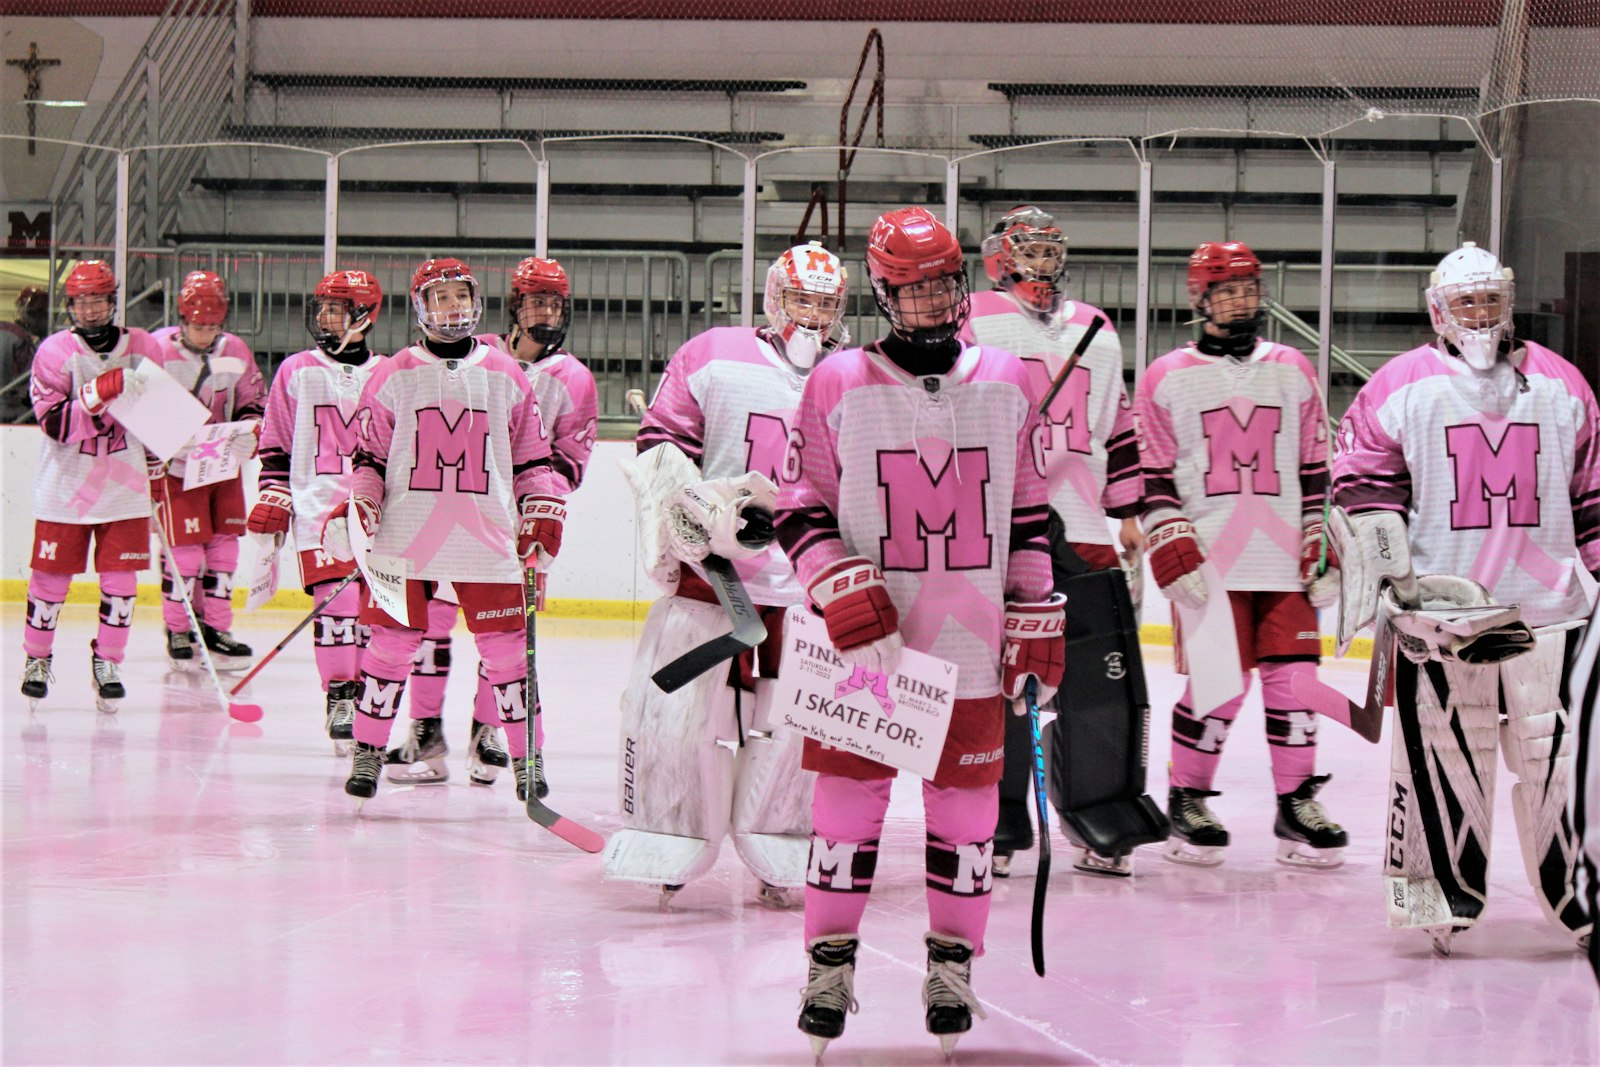 Sporting special uniforms, the Eaglets take to the ice – which was dyed pink – prior to the varsity game against Brother Rice.